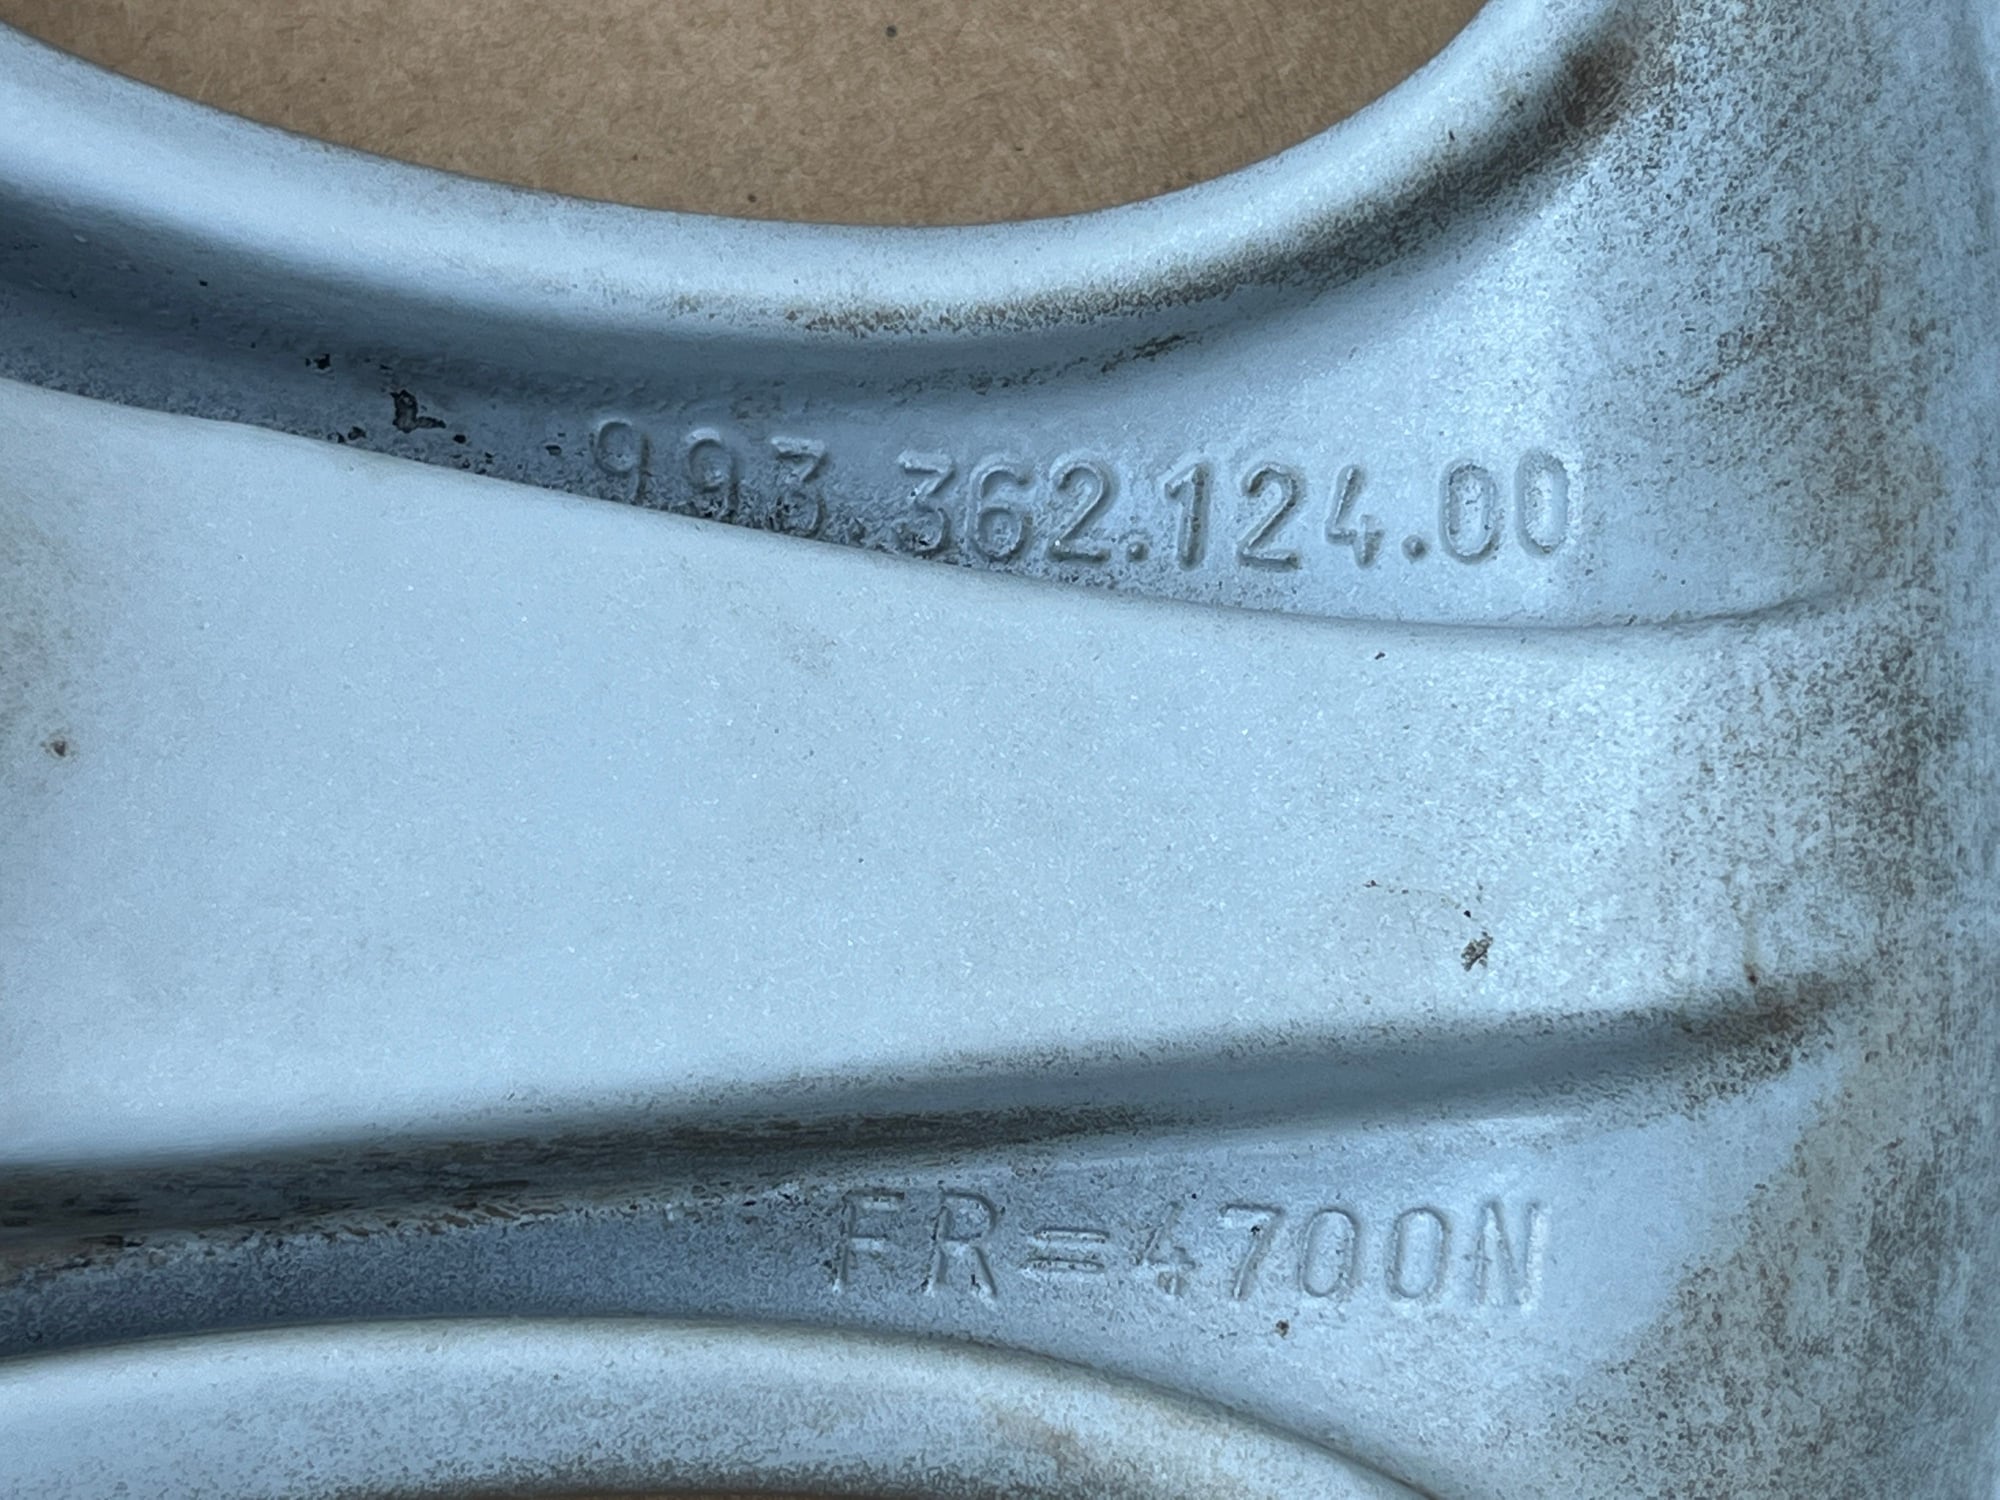 Wheels and Tires/Axles - 993/968 Cup 2 OEM wheels 17" - Used - 1989 to 1997 Porsche 911 - All Years Porsche 968 - Dallas, TX 75218, United States